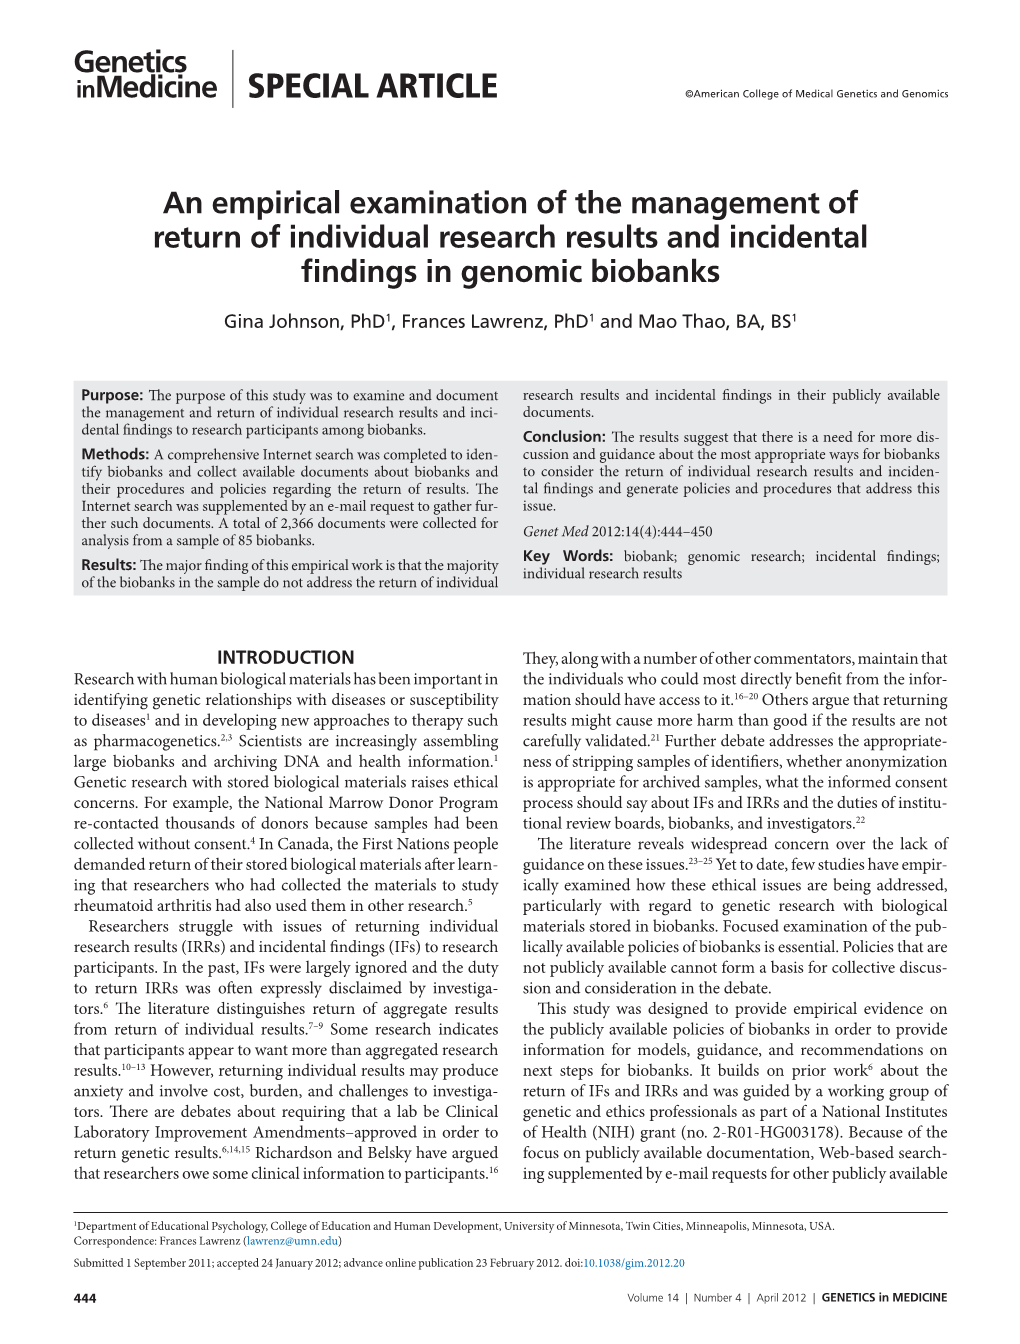 An Empirical Examination of the Management of Return of Individual Research Results and Incidental Findings in Genomic Biobanks